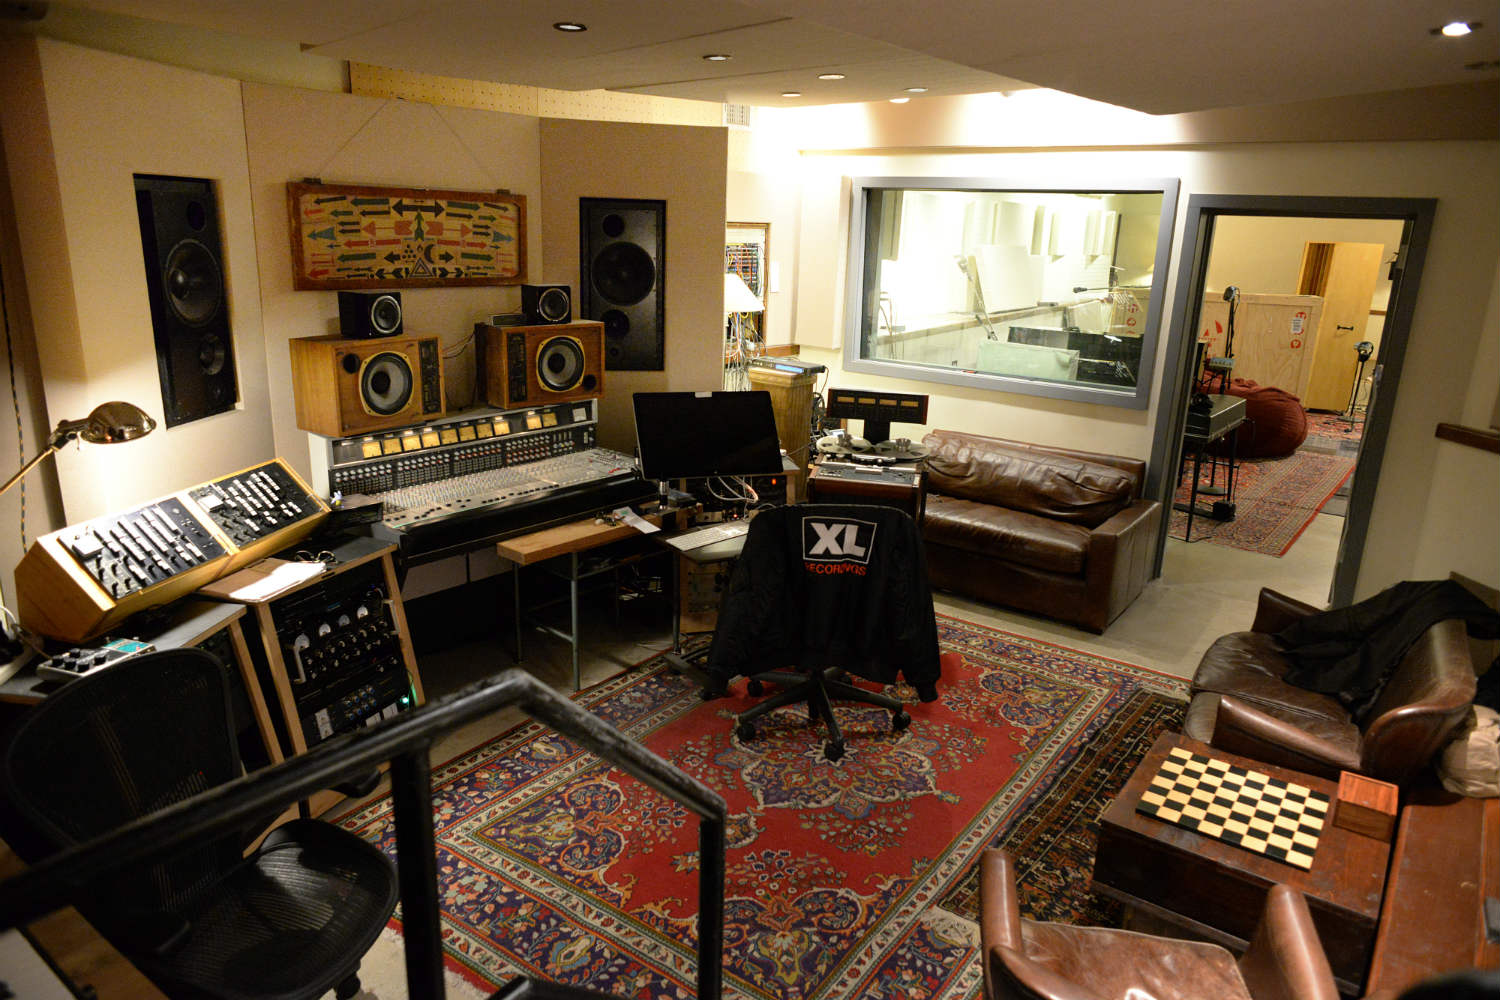 Jack Antonoff's XL Studios from his XL Recordings label, located in Soho, NYC, designed by WSDG. Control Room